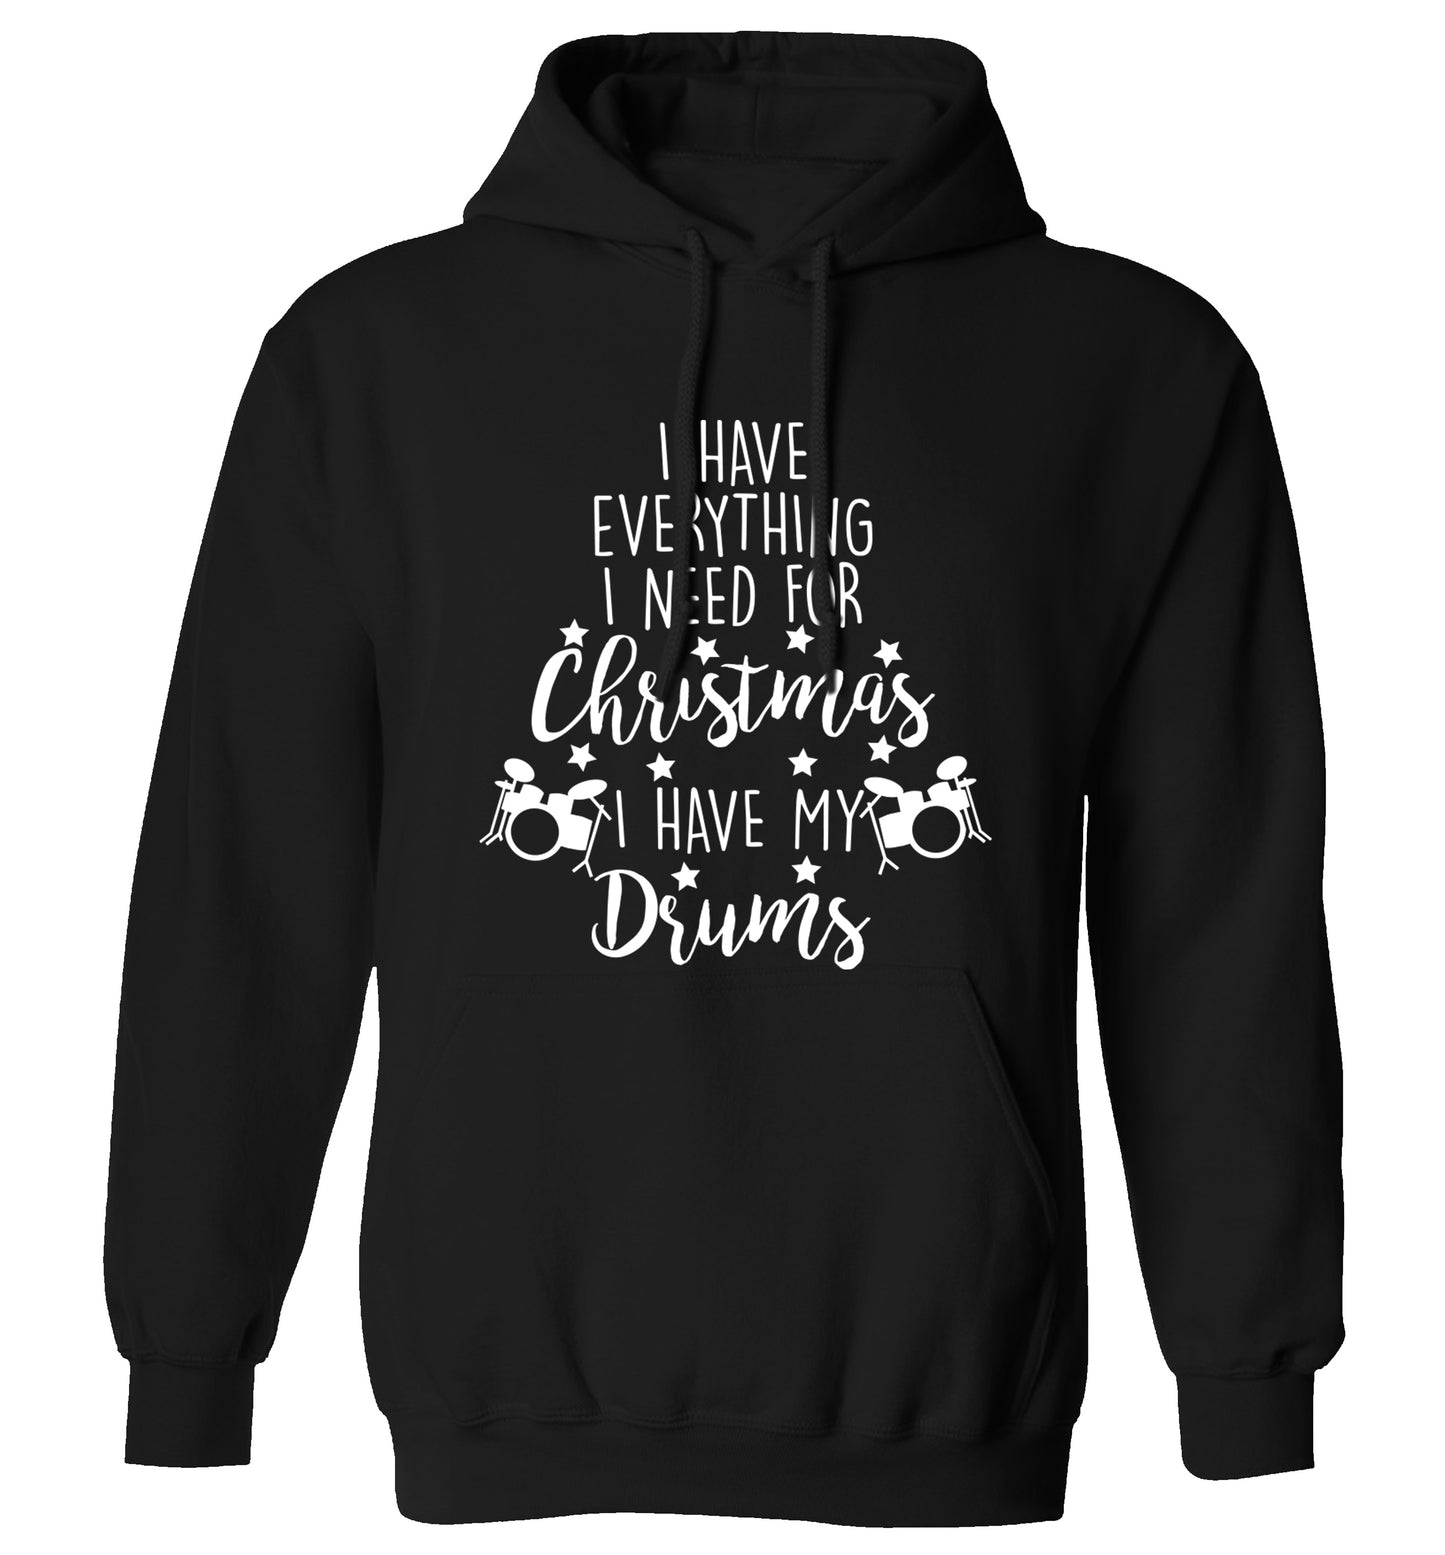 I have everything I need for Christmas I have my drums! adults unisex black hoodie 2XL